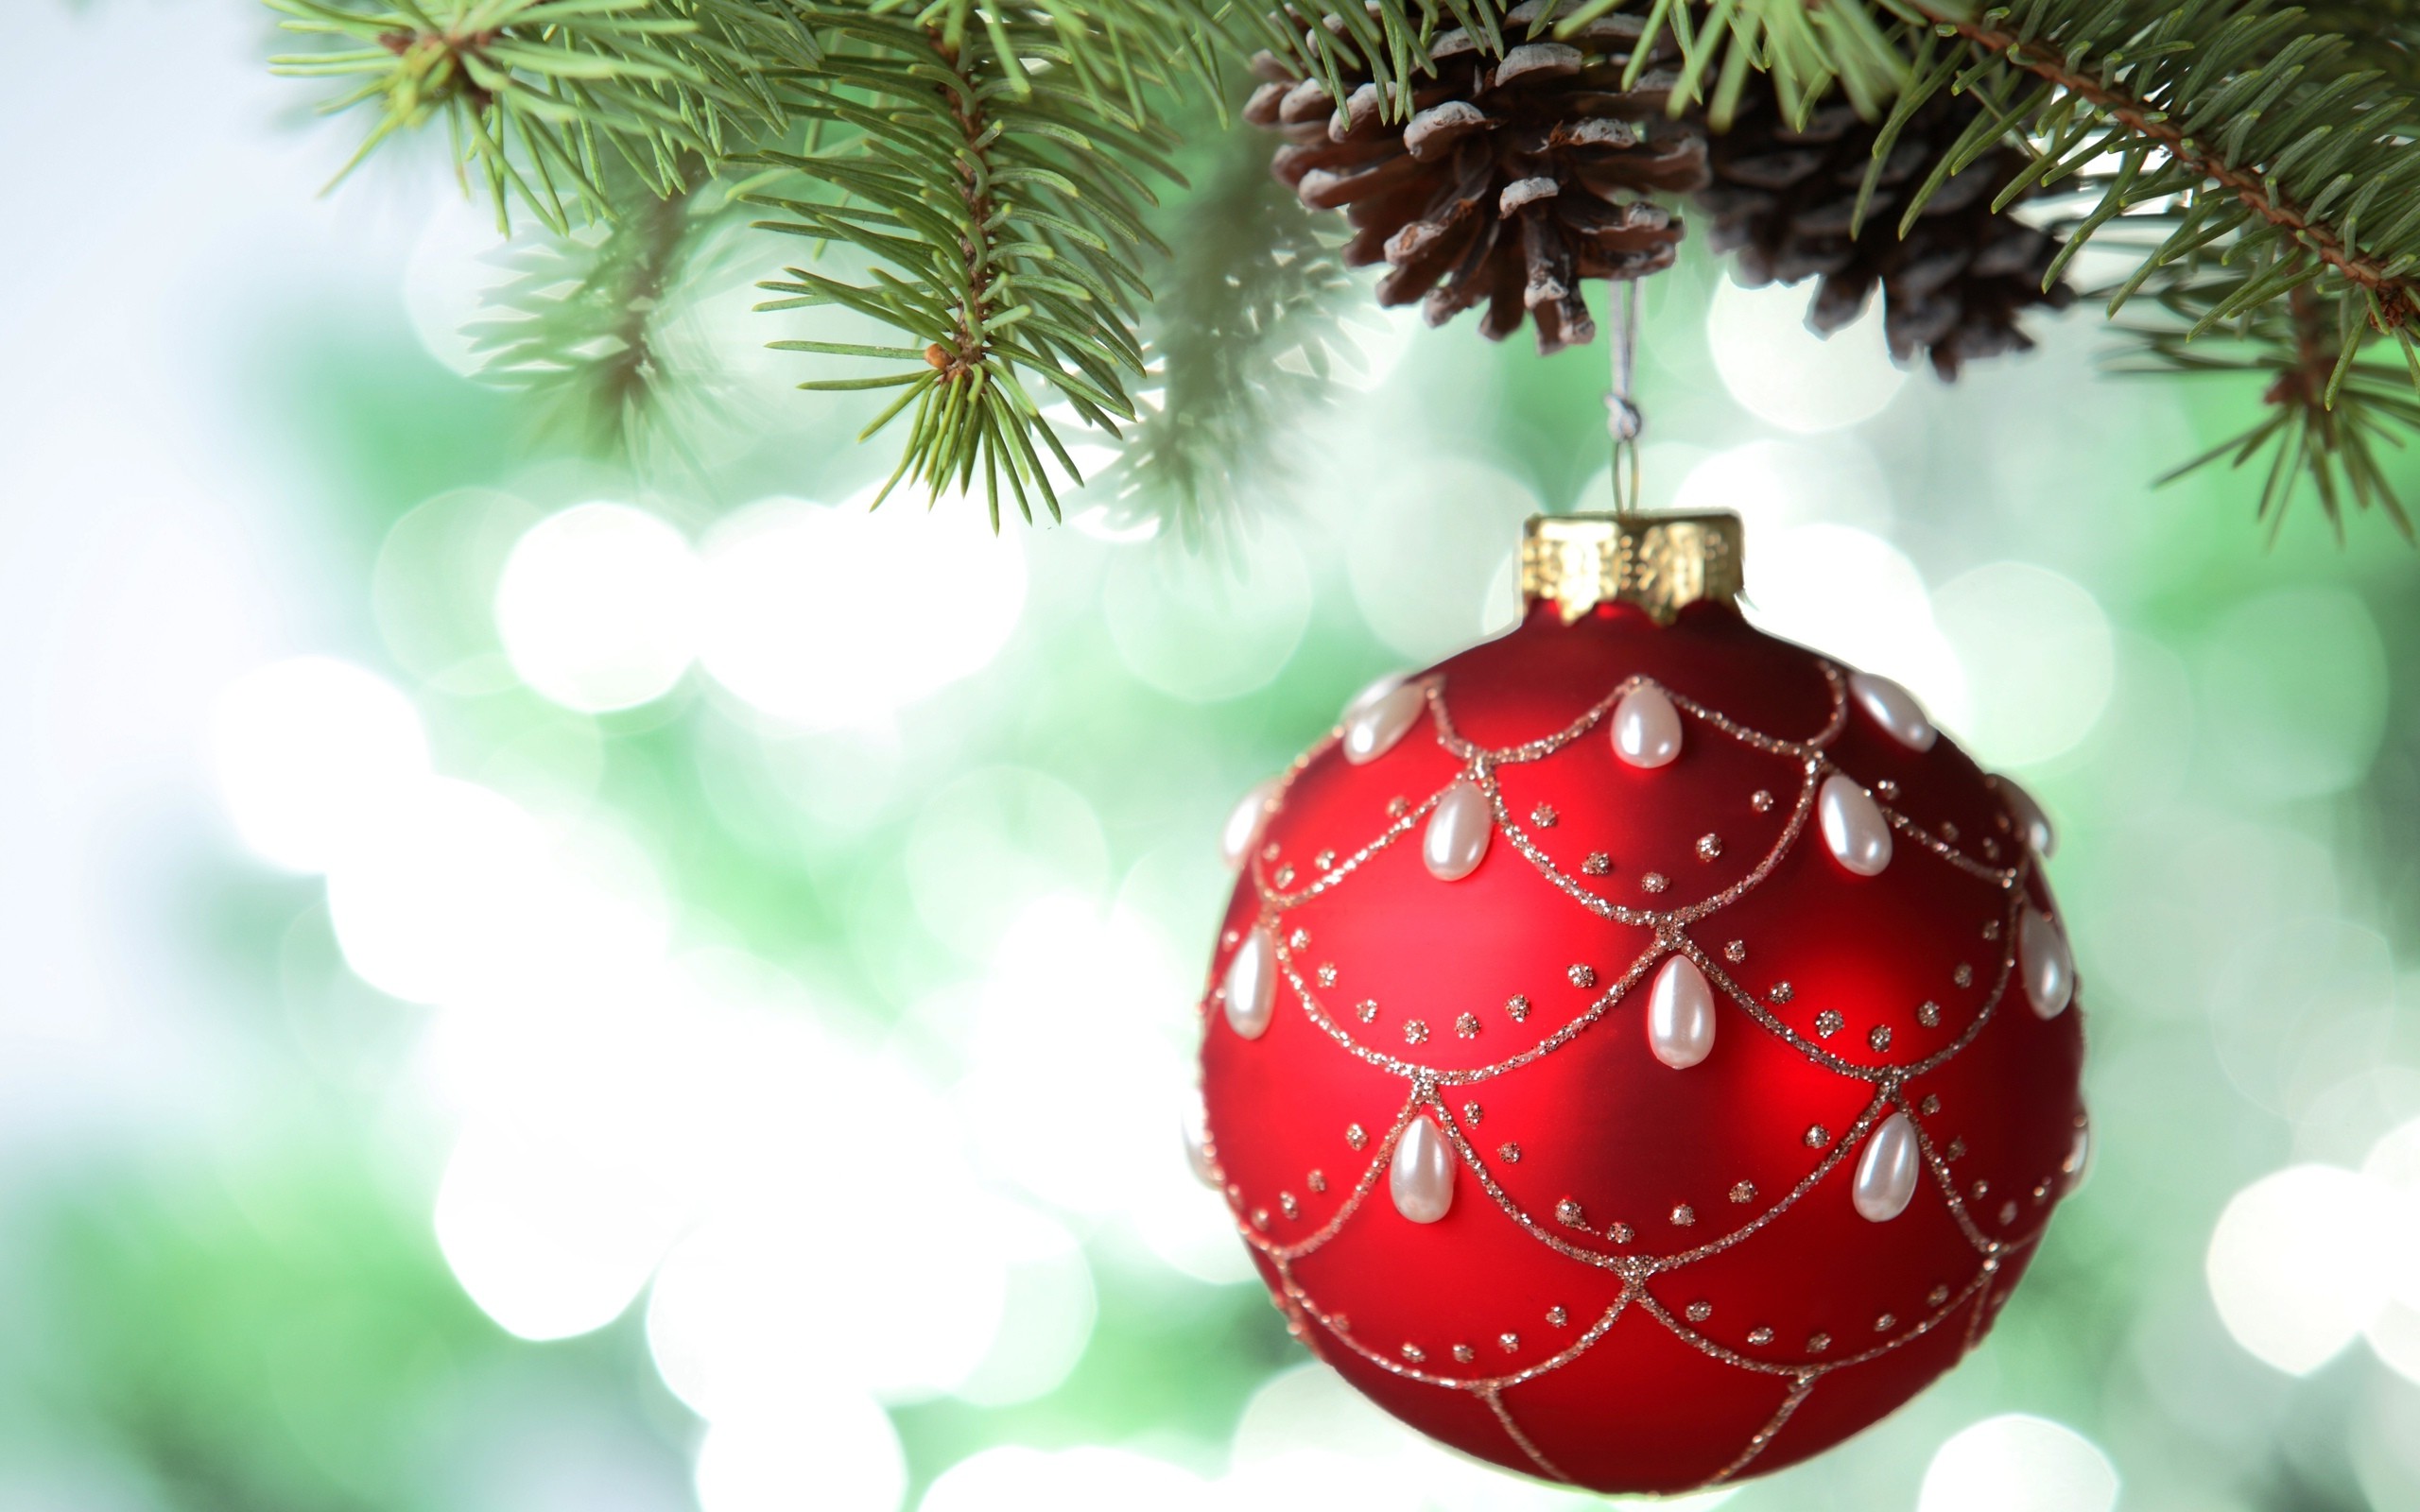 New Year, Snow, Christmas Ornaments, Cones, Bokeh, Leaves Wallpapers HD